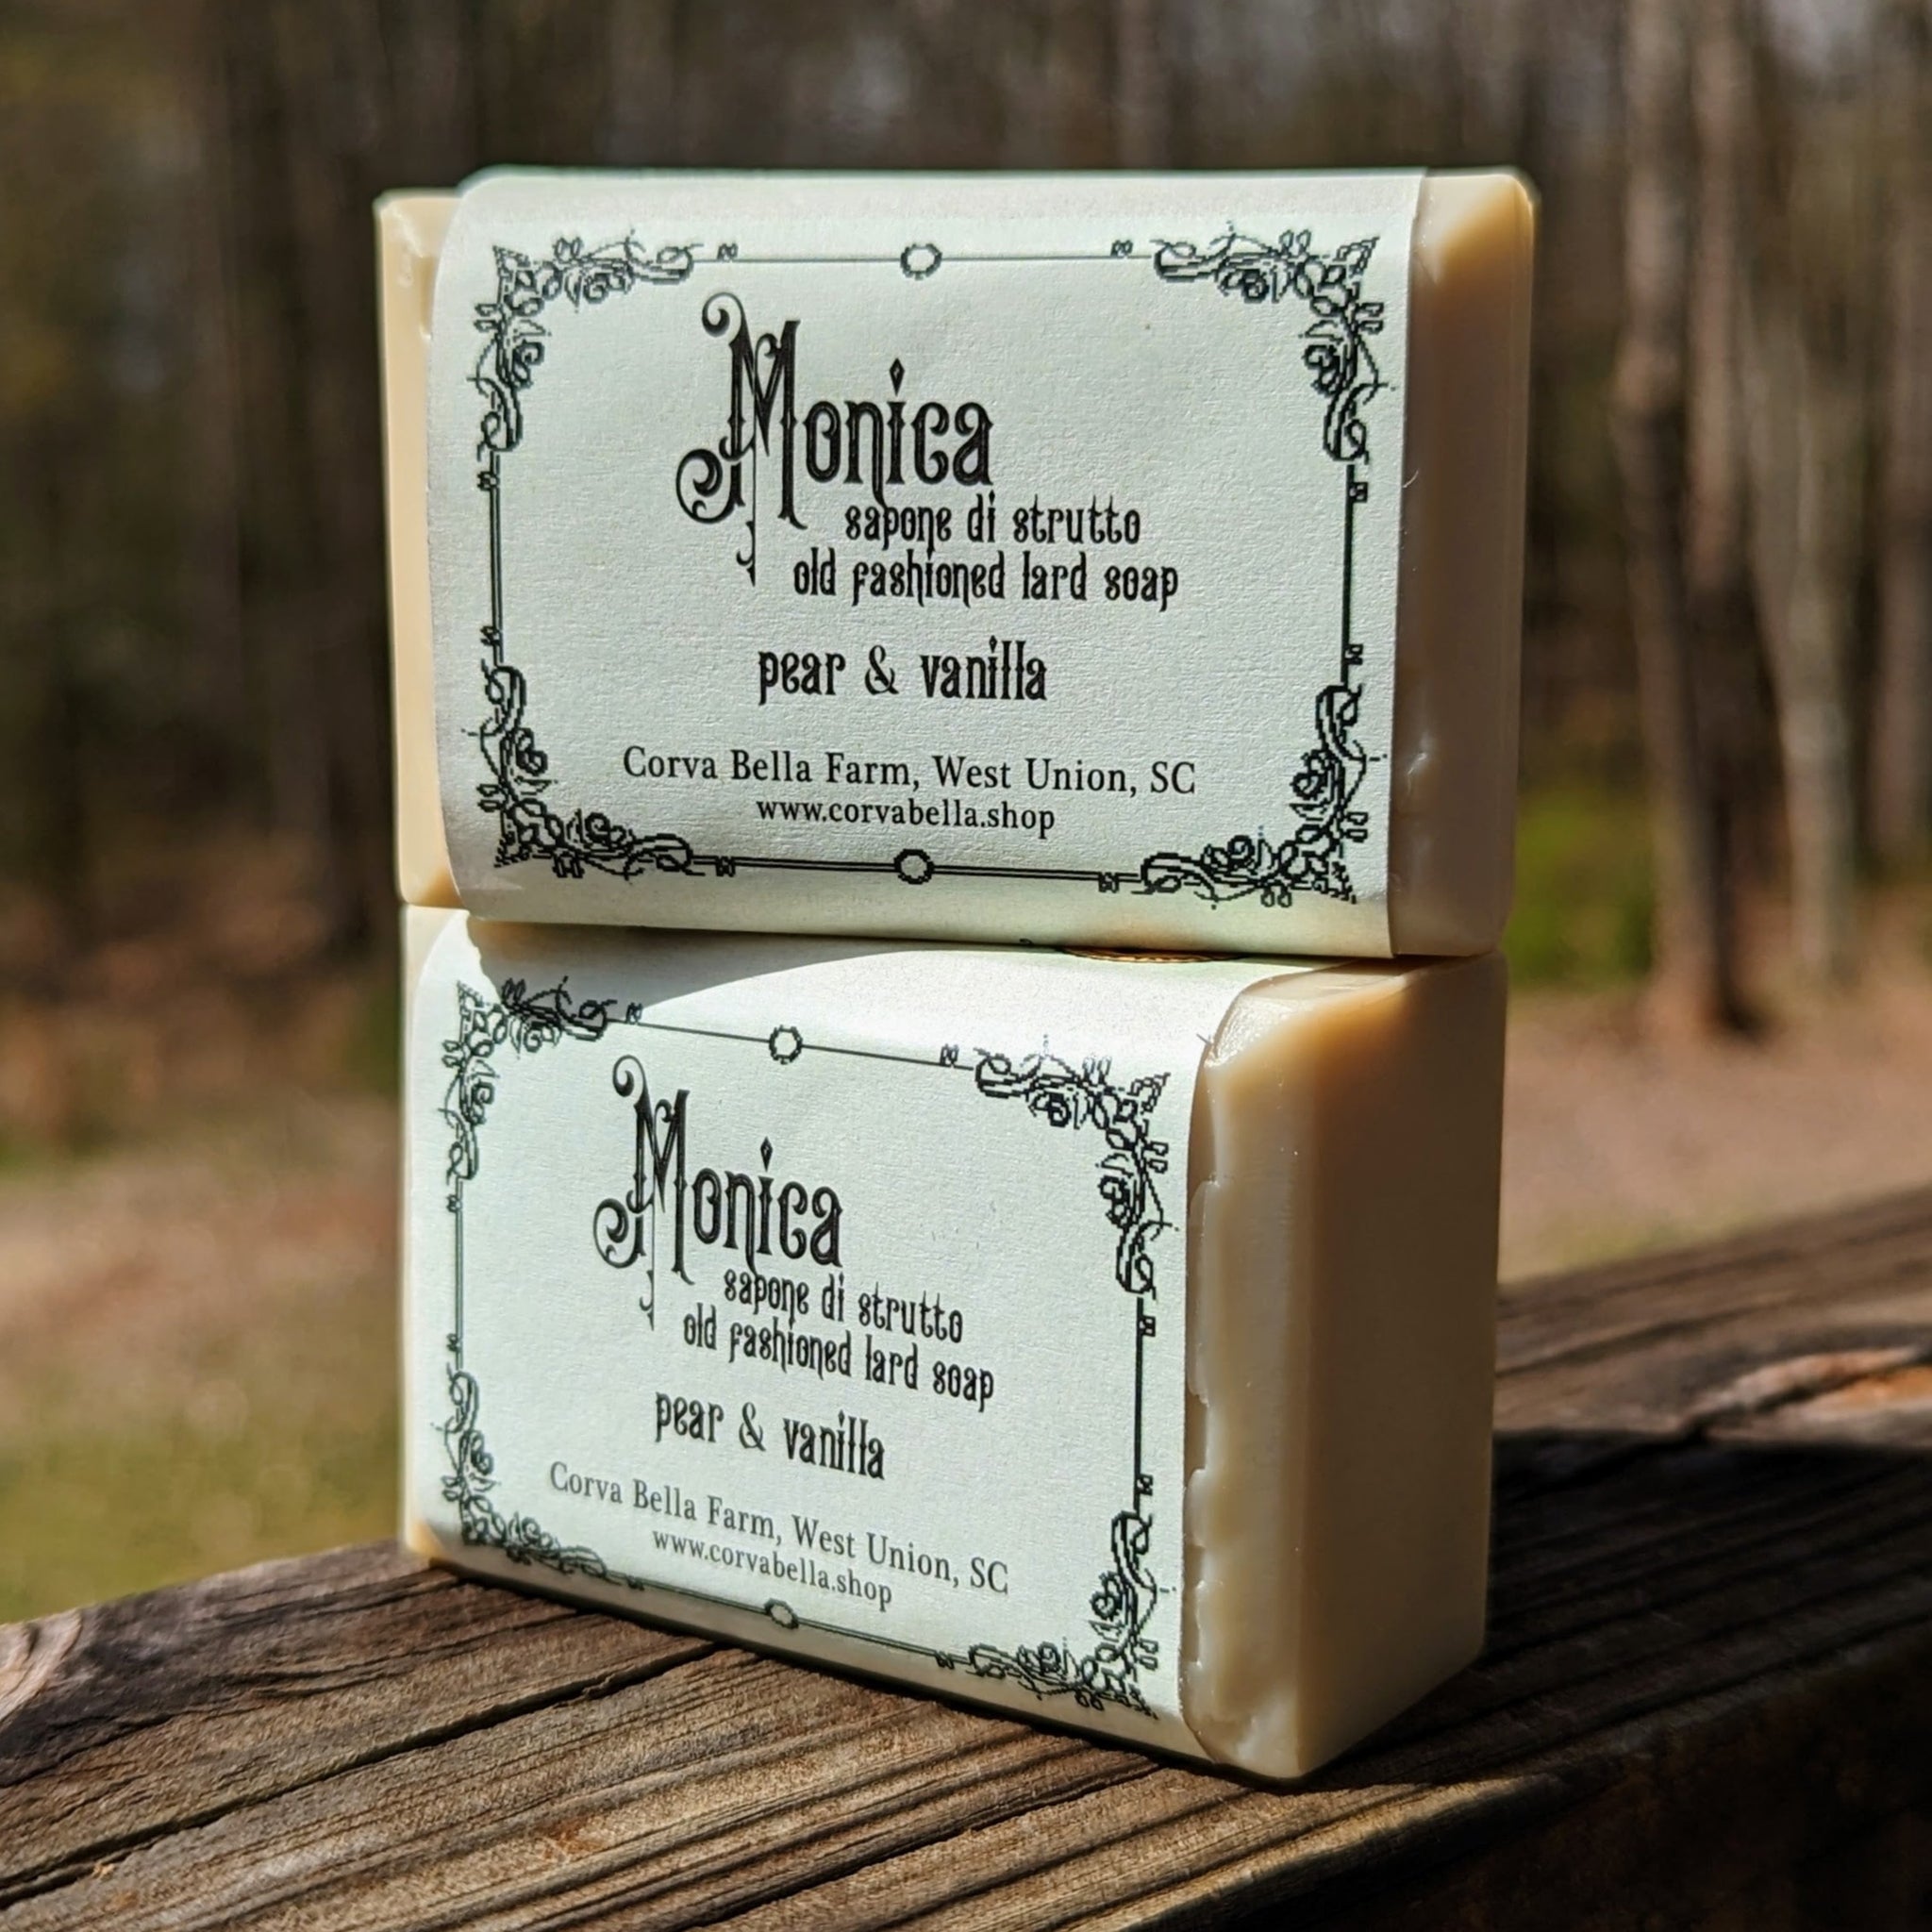 MONICA  lard soap - Pear & Vanilla (Reduced price FULL SIZE bars due to corner damage, SAMPLES AVAILABLE)